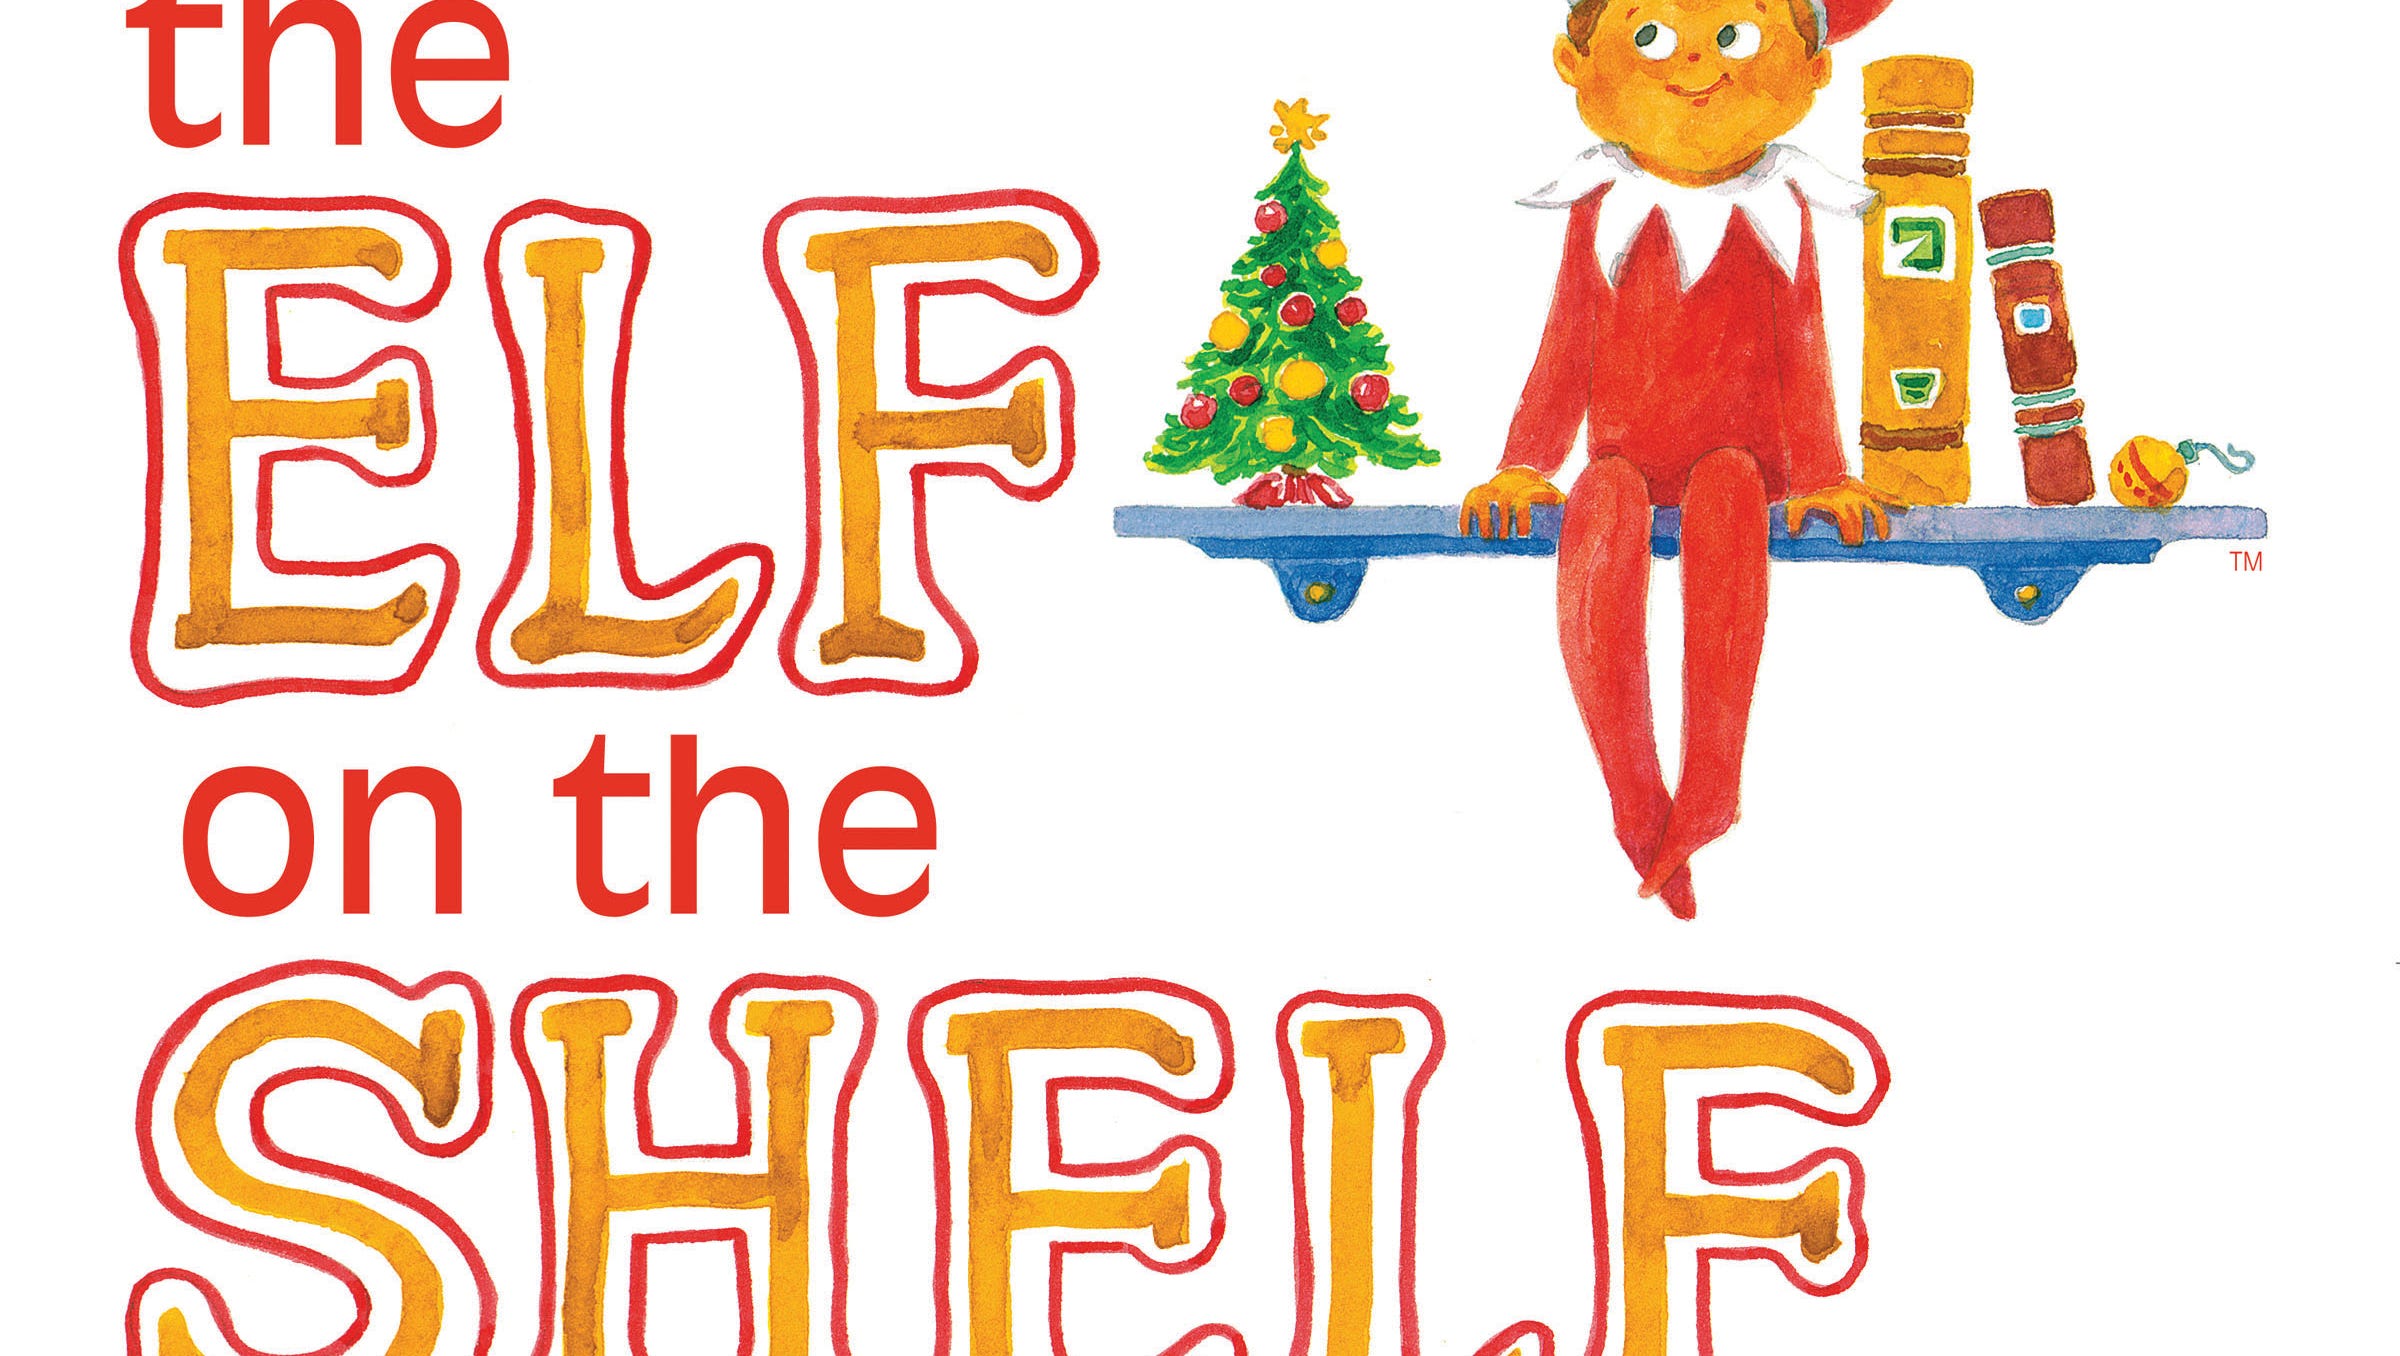 The Elf on the Shelf by Carol Aebersold and her daughter Chanda Bell